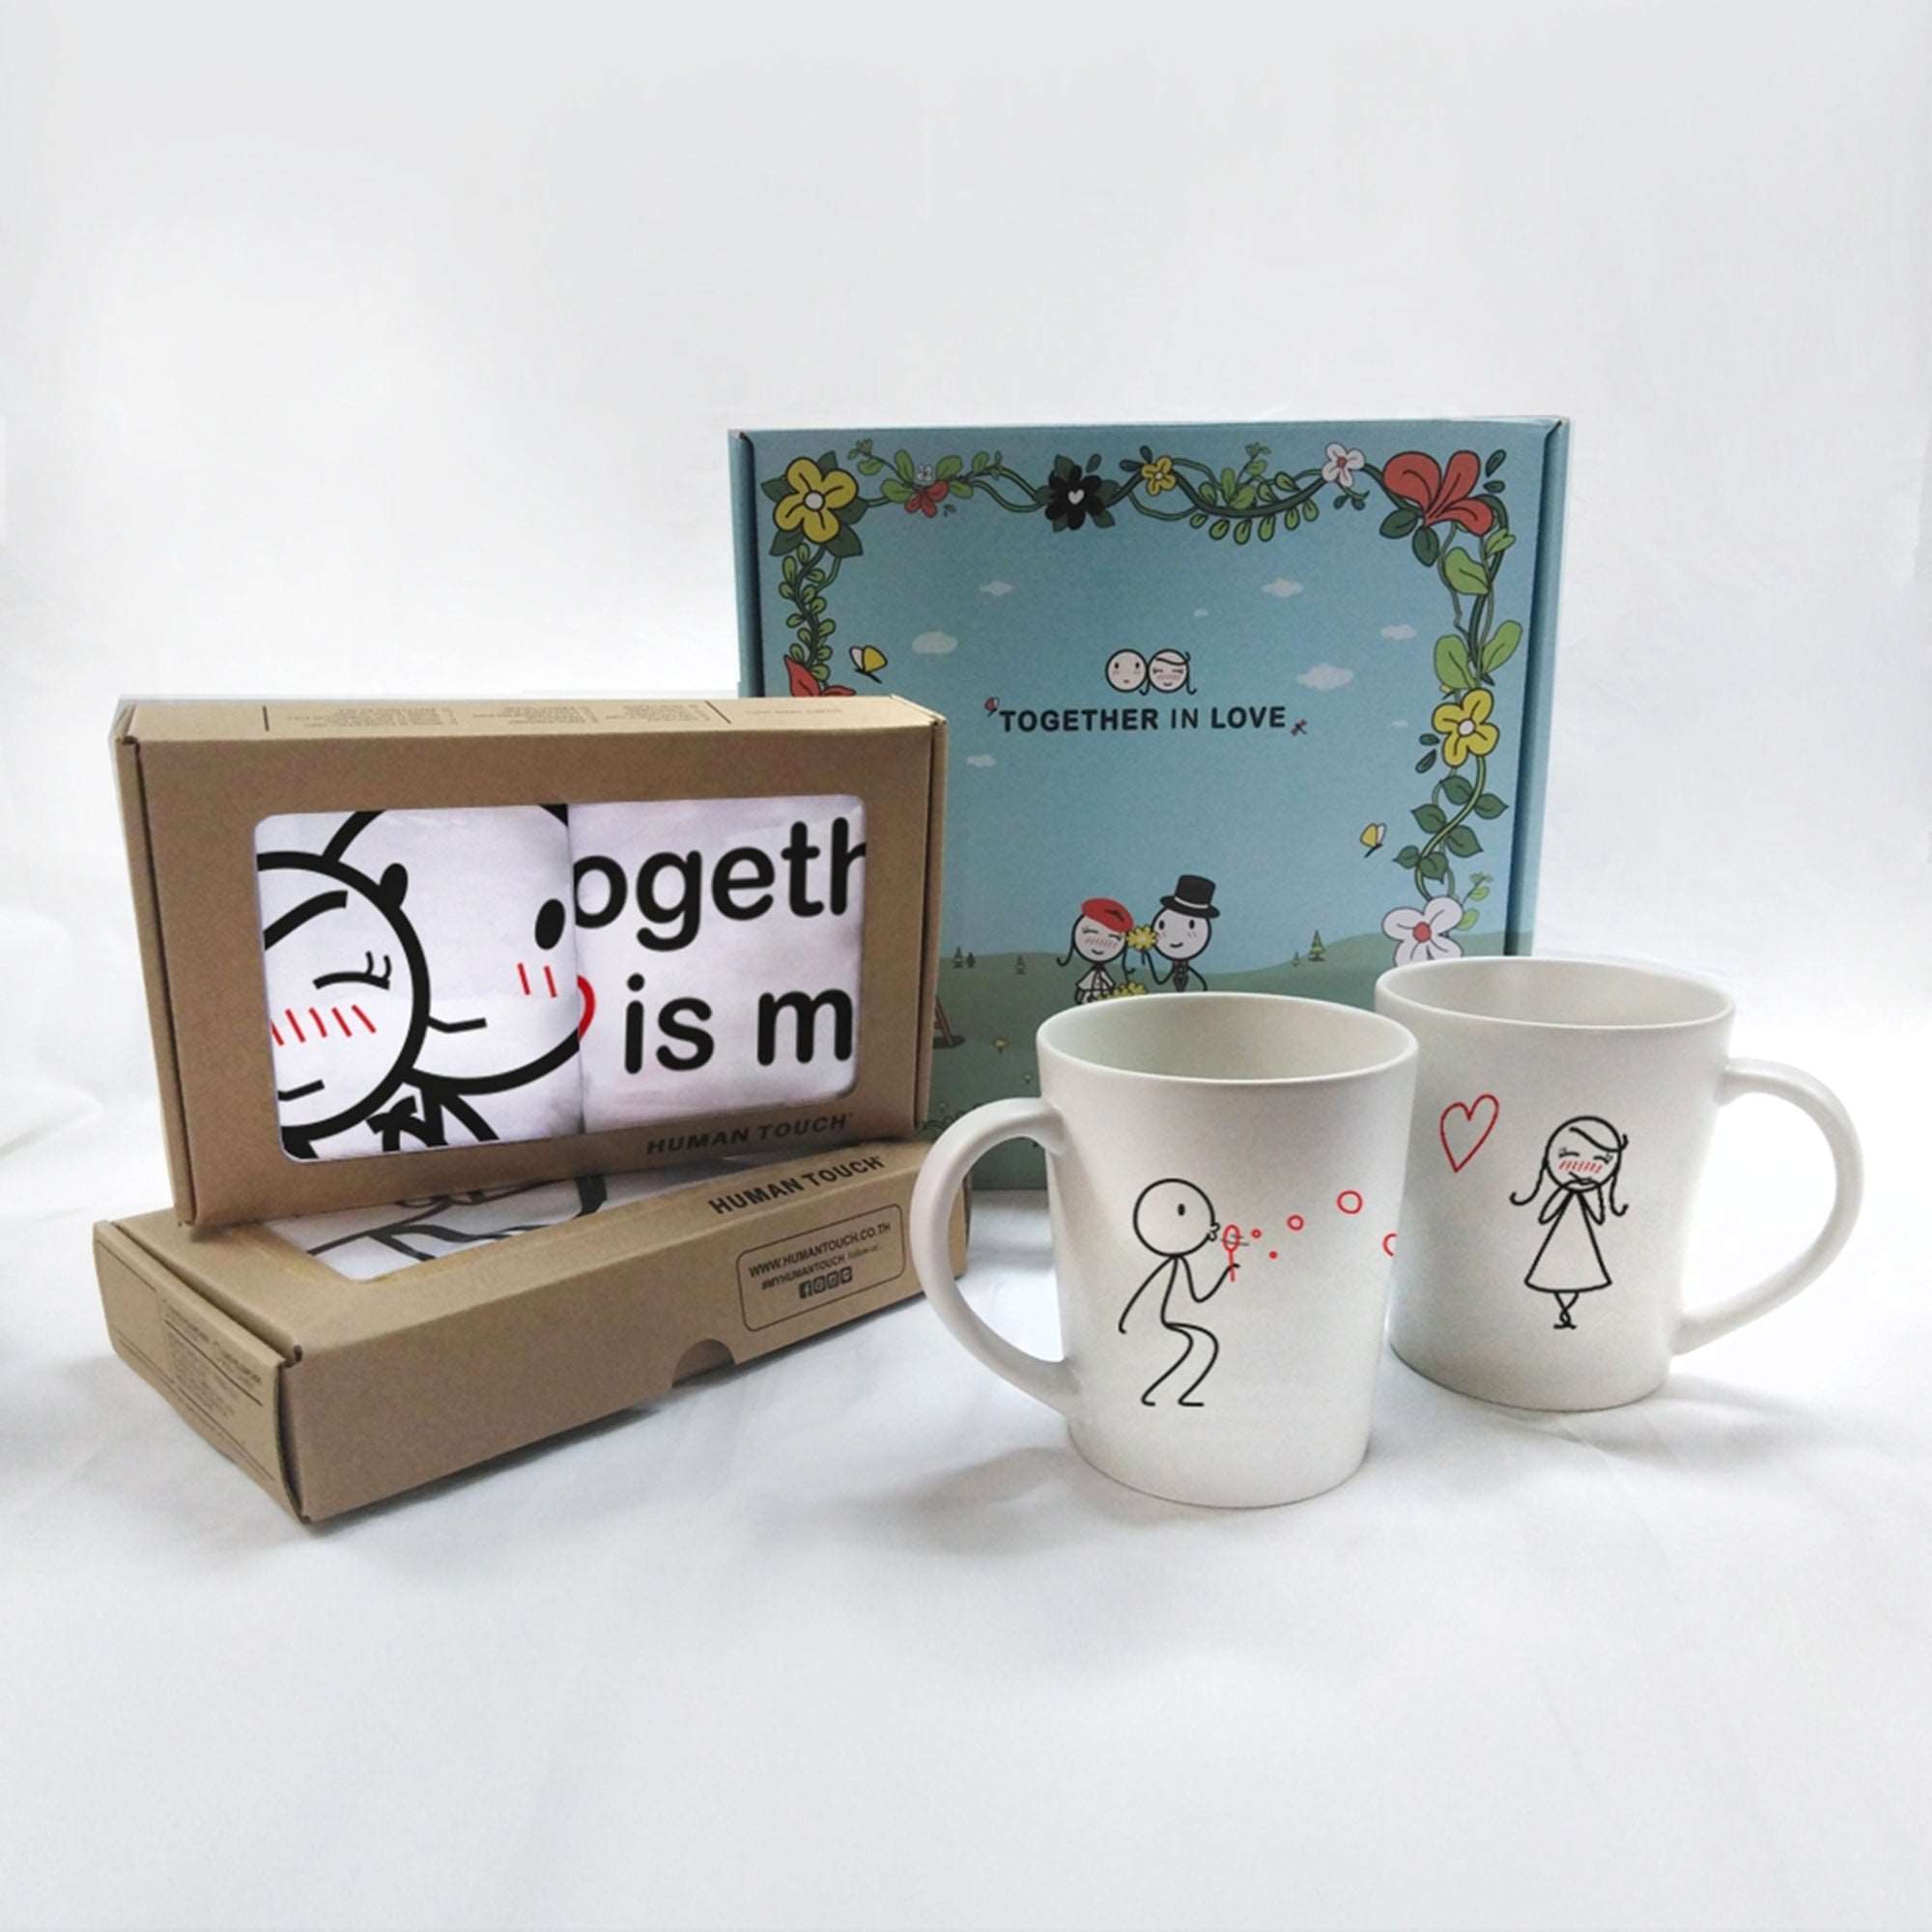 Together with you is my favorite place to be gift setHome & GardenHuman Touch OfficialThis unique gift set is sure to make your special someone feel absolutely treasured! Remind them that your time together is everything, no matter what it's spent on.